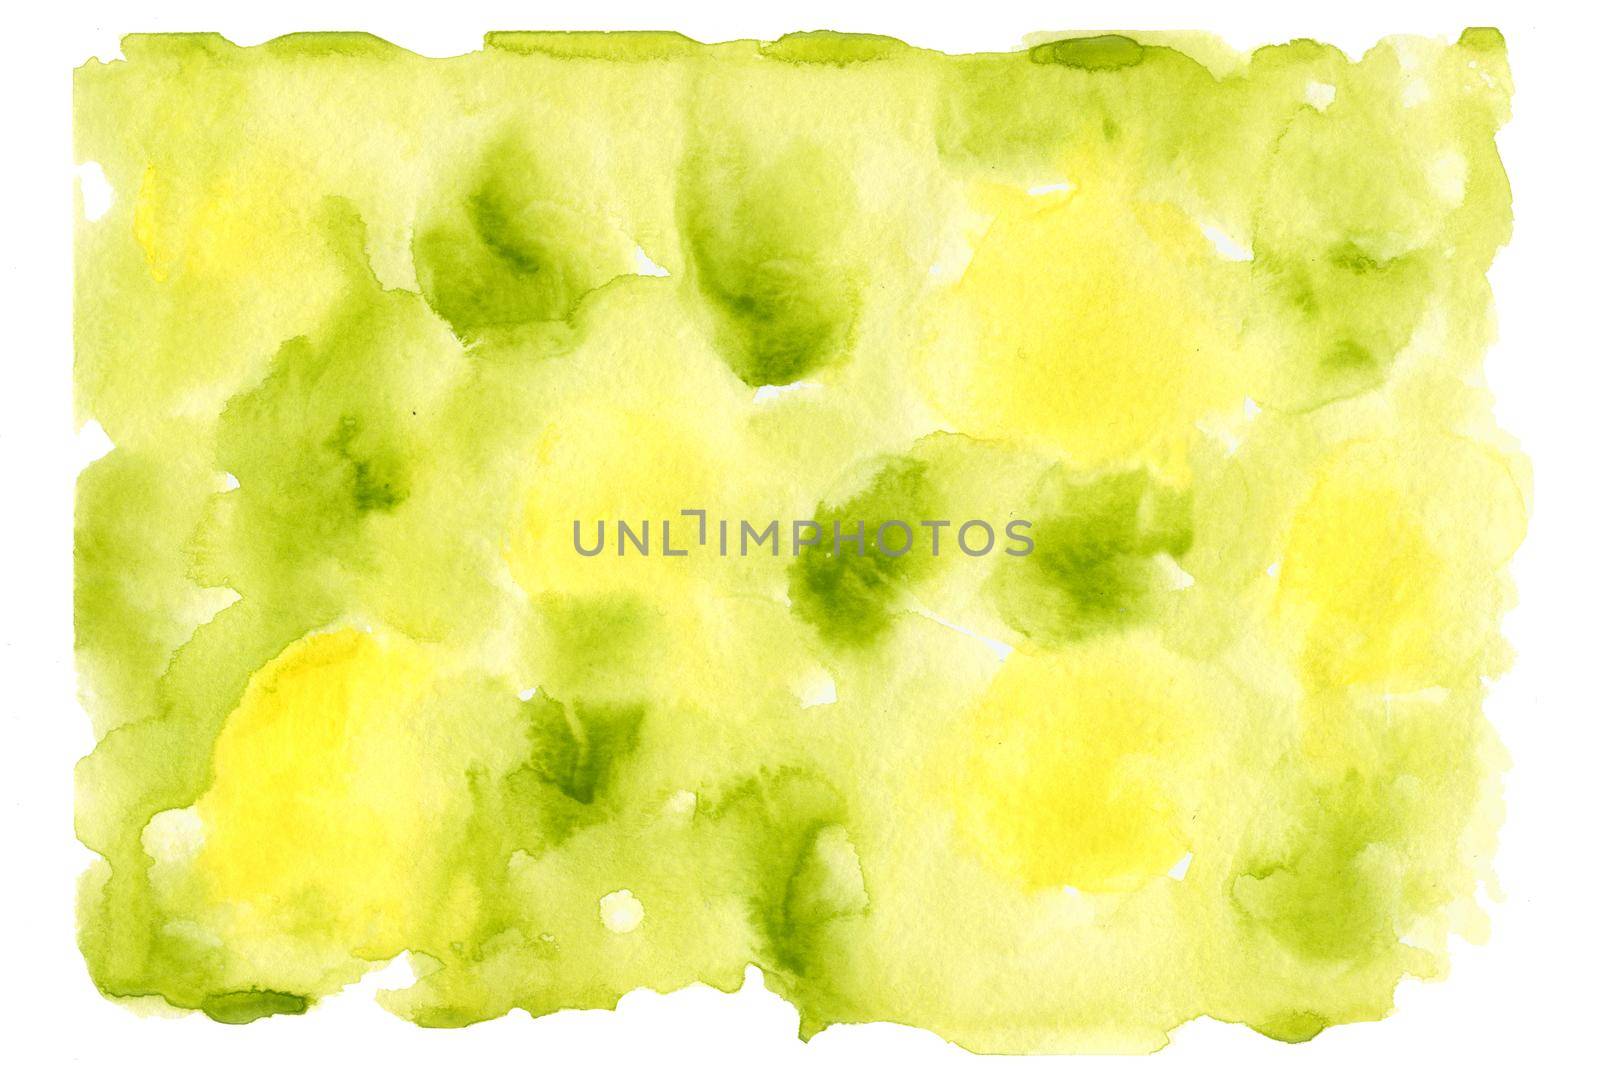 Blurred watercolor background yellow lemon and green by electrovenik